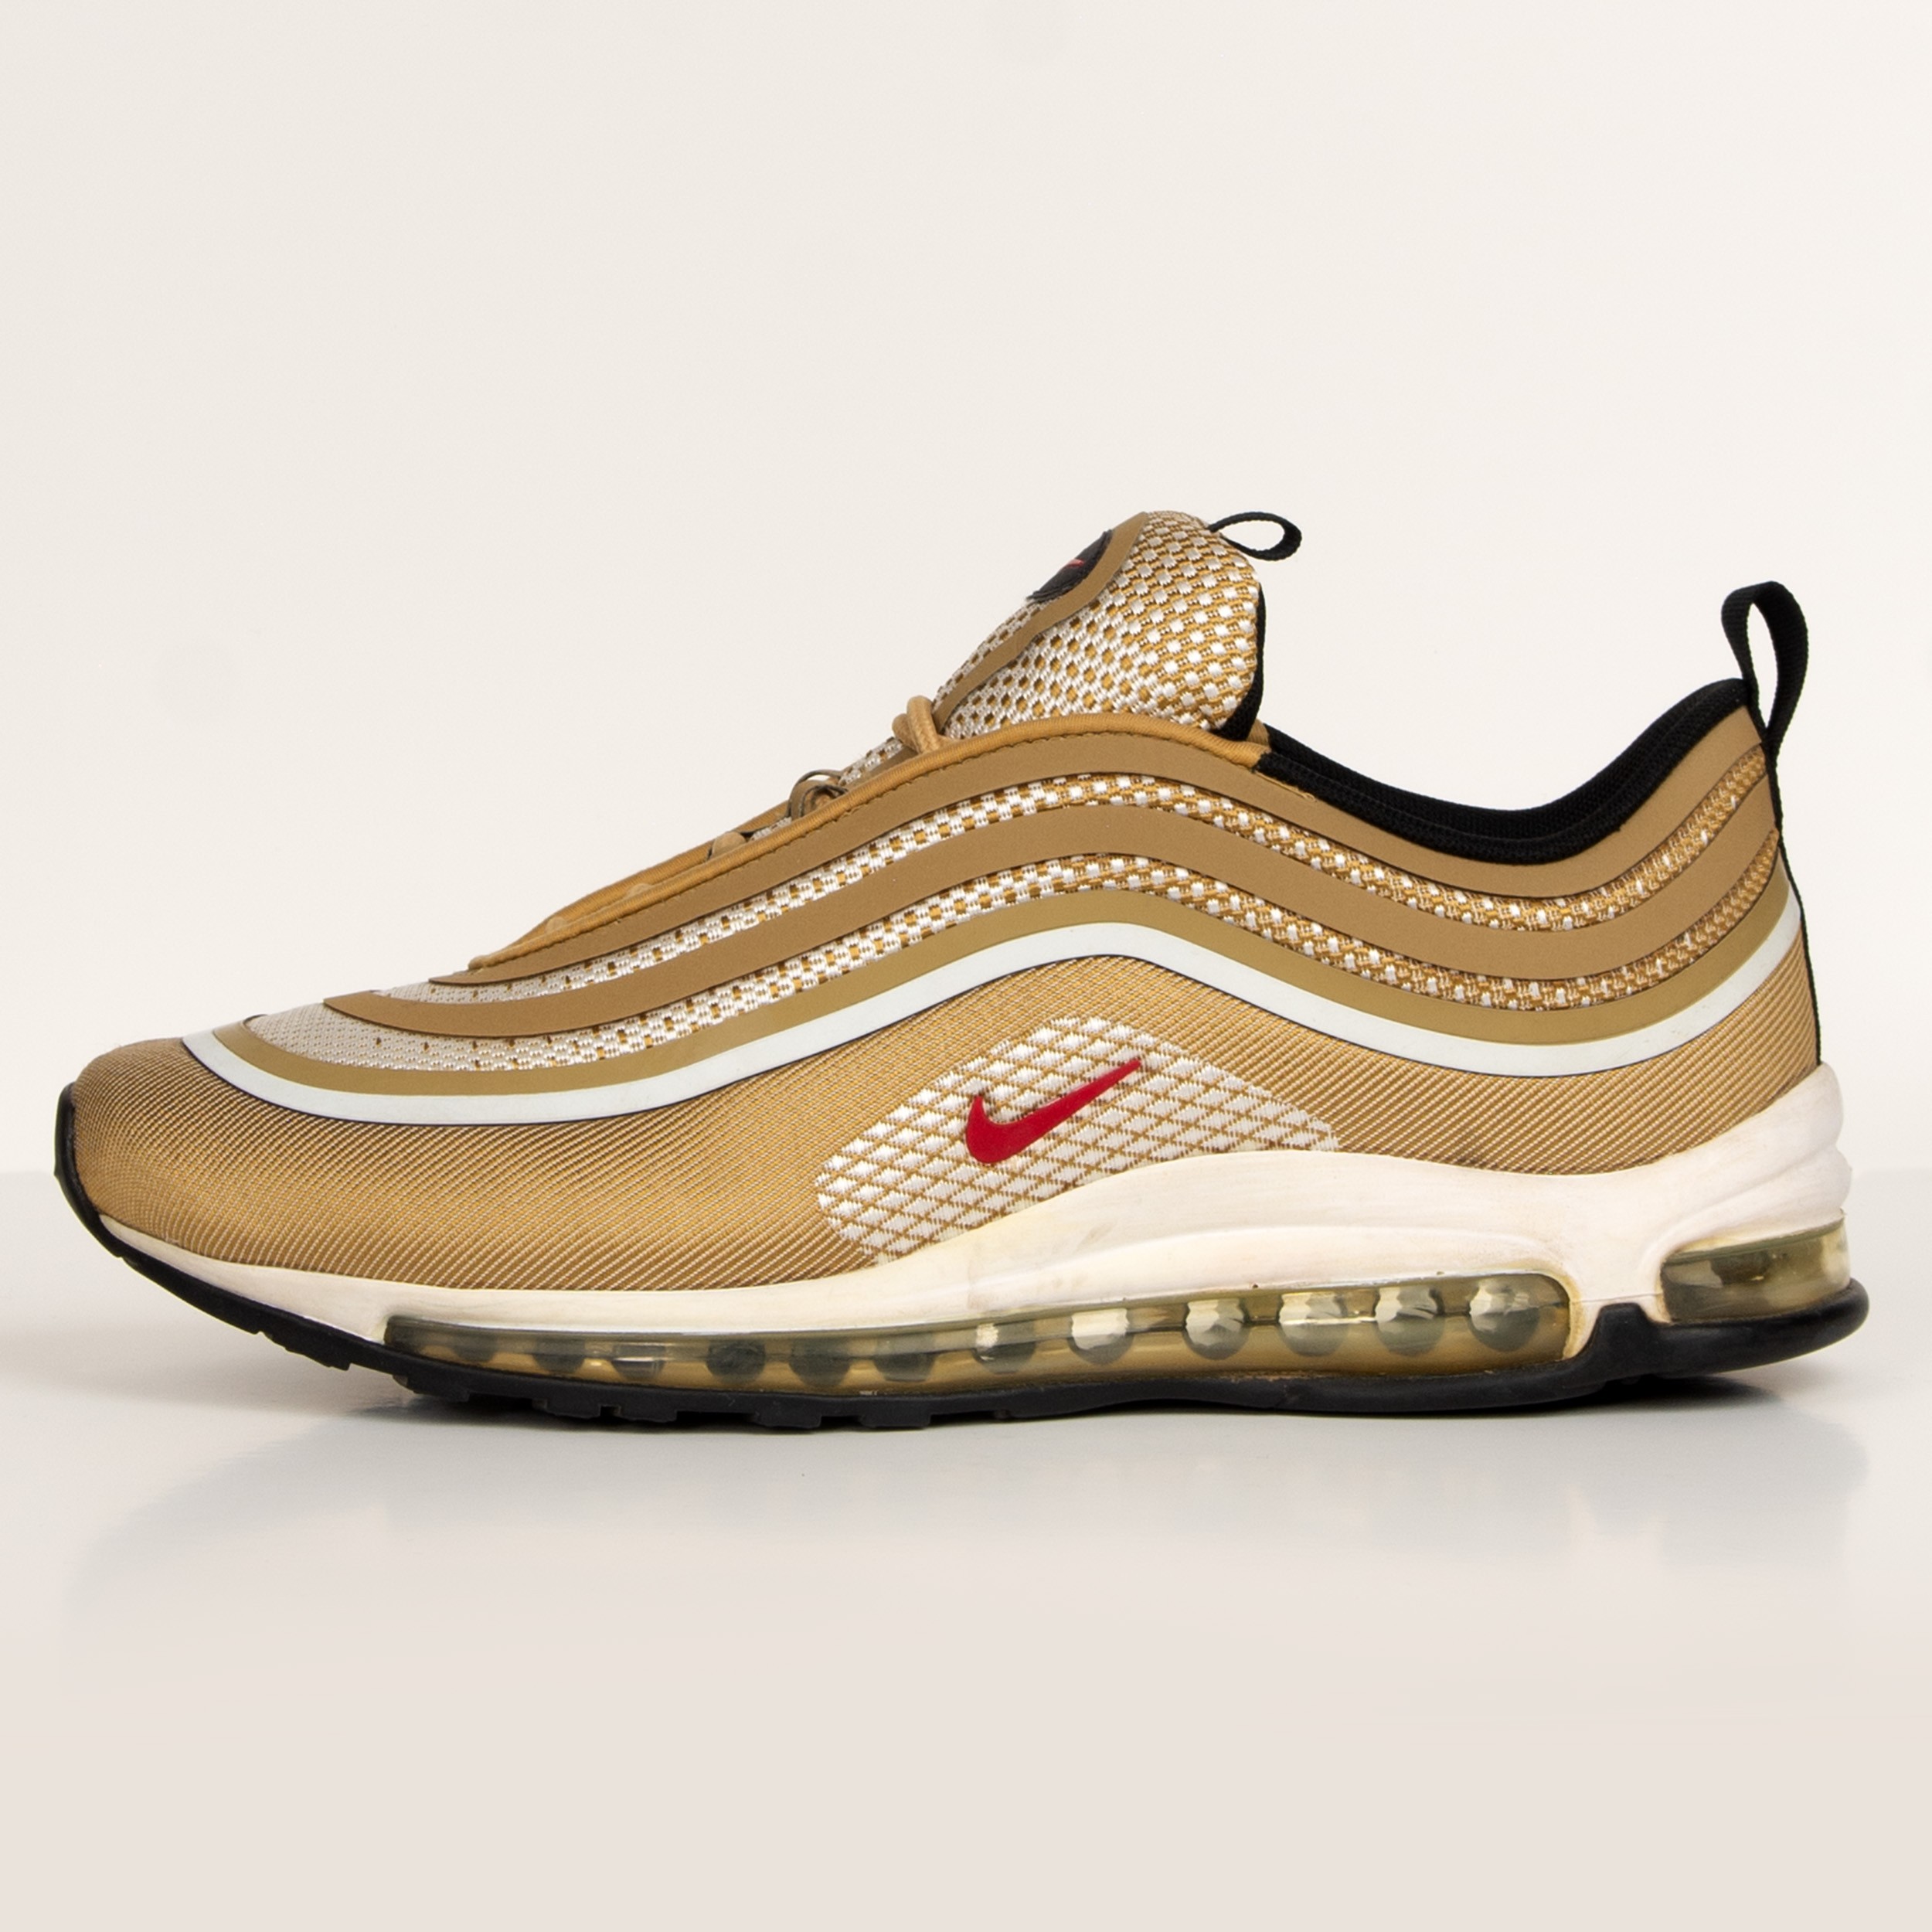 RE-POCKETS NIKE TRAINERS 97 AIR MAX GOLD